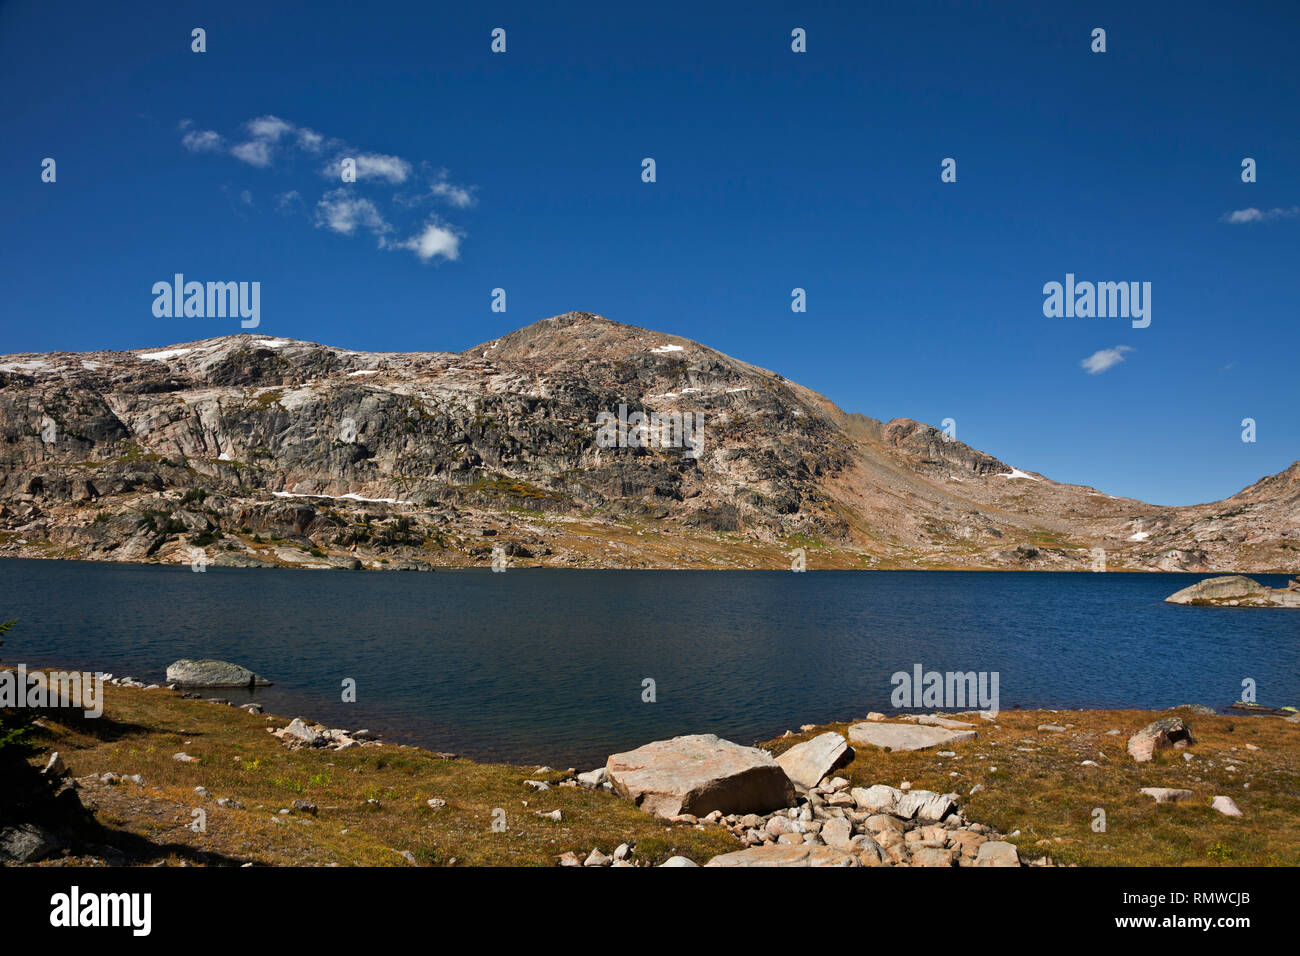 WY03764-00...WYOMING - View from the Beartooth Highlakes Trail in the Beartooth Mountains area of the Shoshone National Forest. Stock Photo